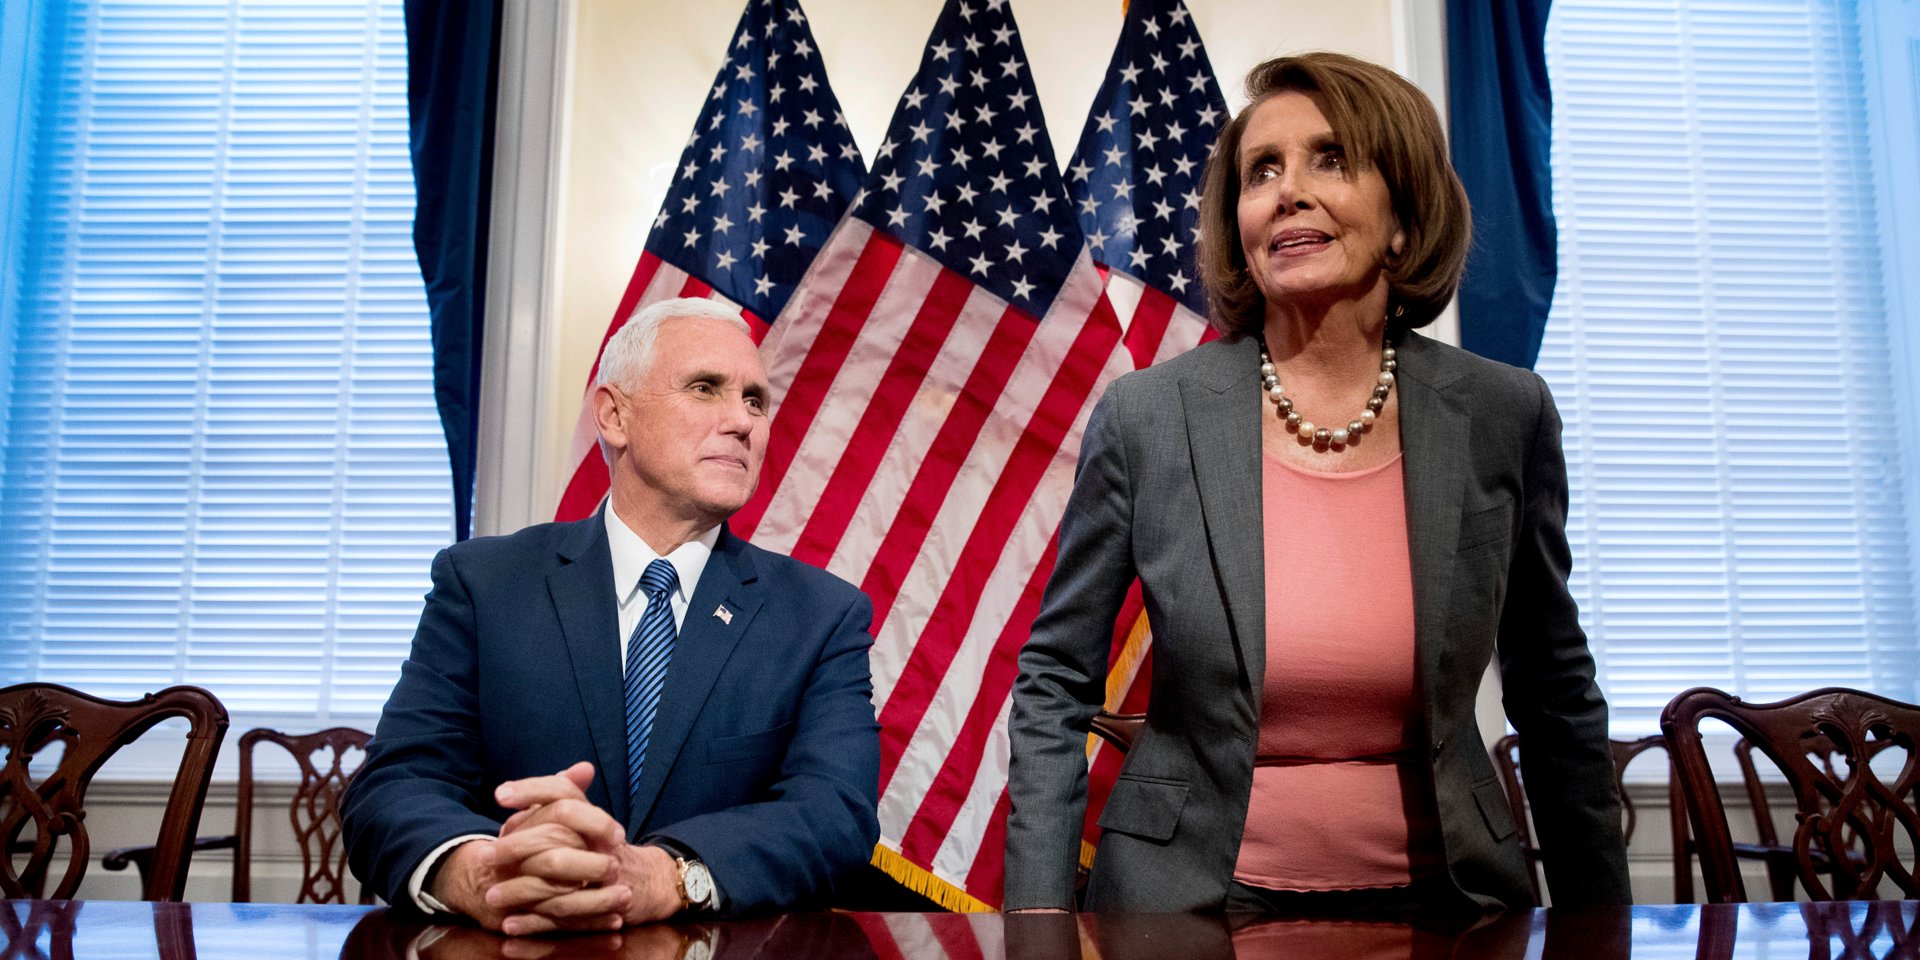 Nancy Pelosi Strips VP Mike Pence Of Office In The House Of Representatives